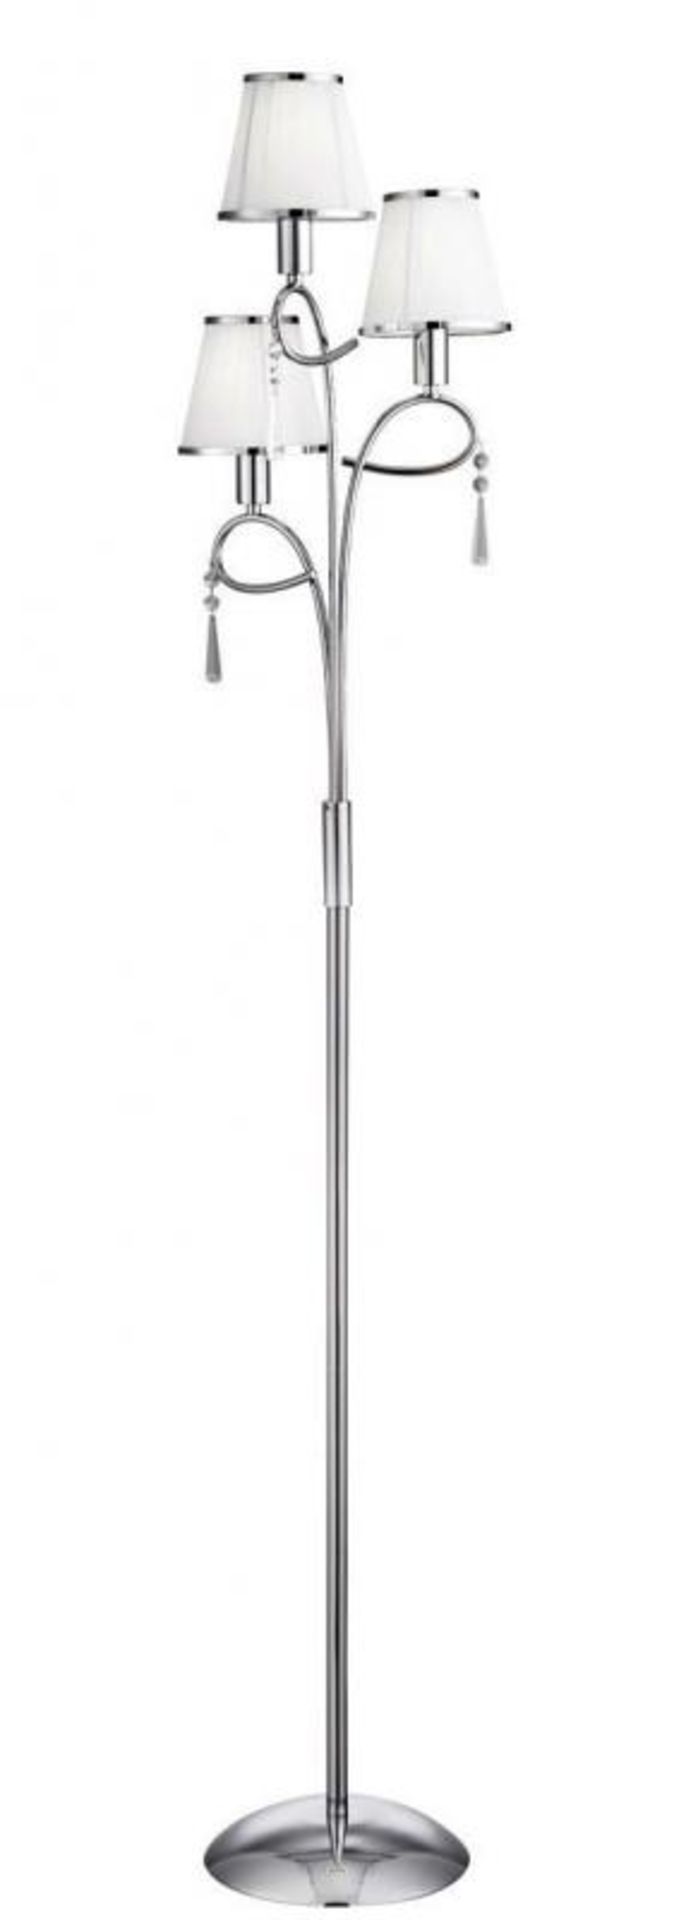 1 x Simplicity Polished Chrome 3 Light Floor Lamp With White String Lamp Shades - 240v - Height 159c - Image 2 of 3